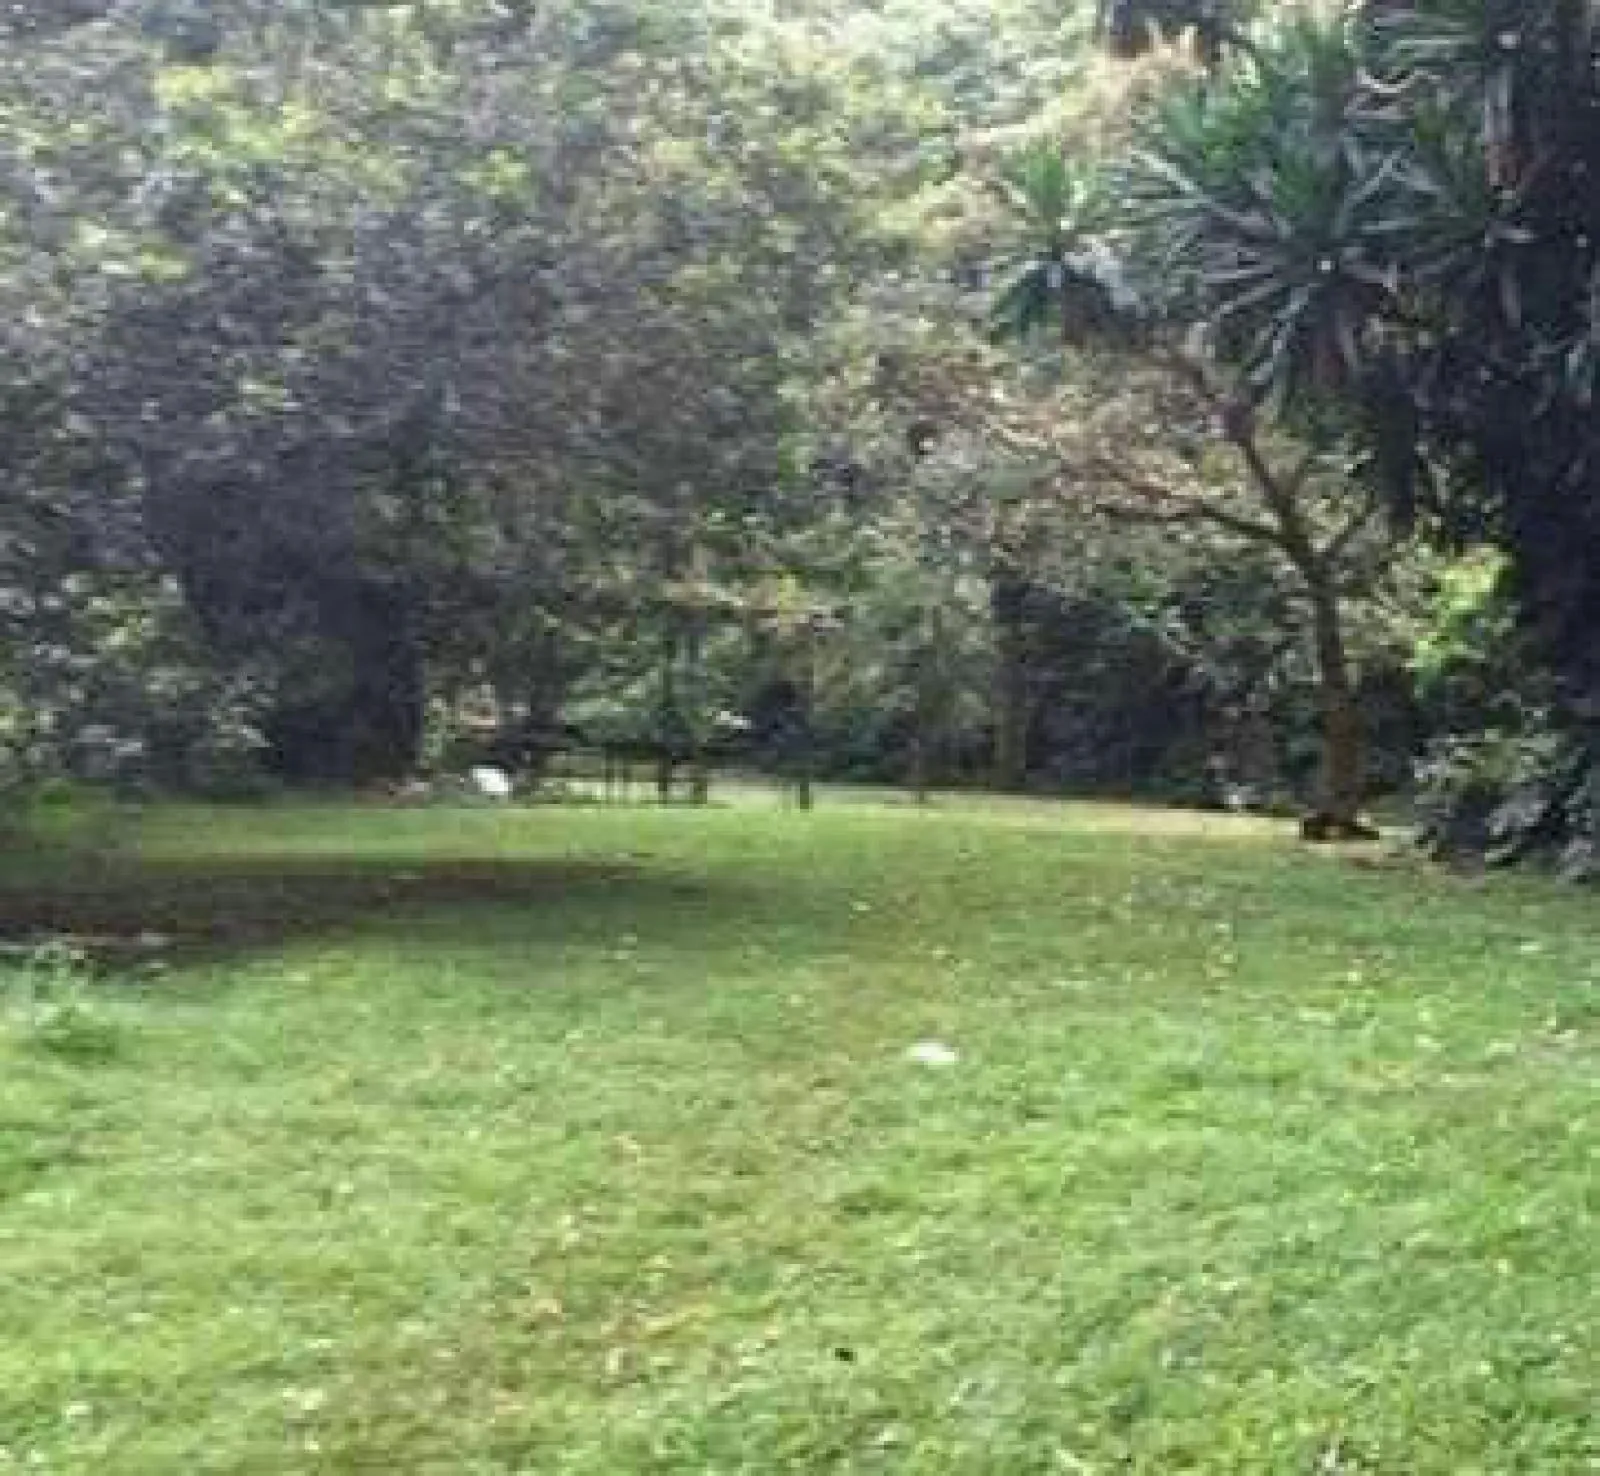 Land for sale in Karen Hardy 1.25 Acres 75M ONLY choice of two Ready Title Deed QUICK SALE Exclusive🔥